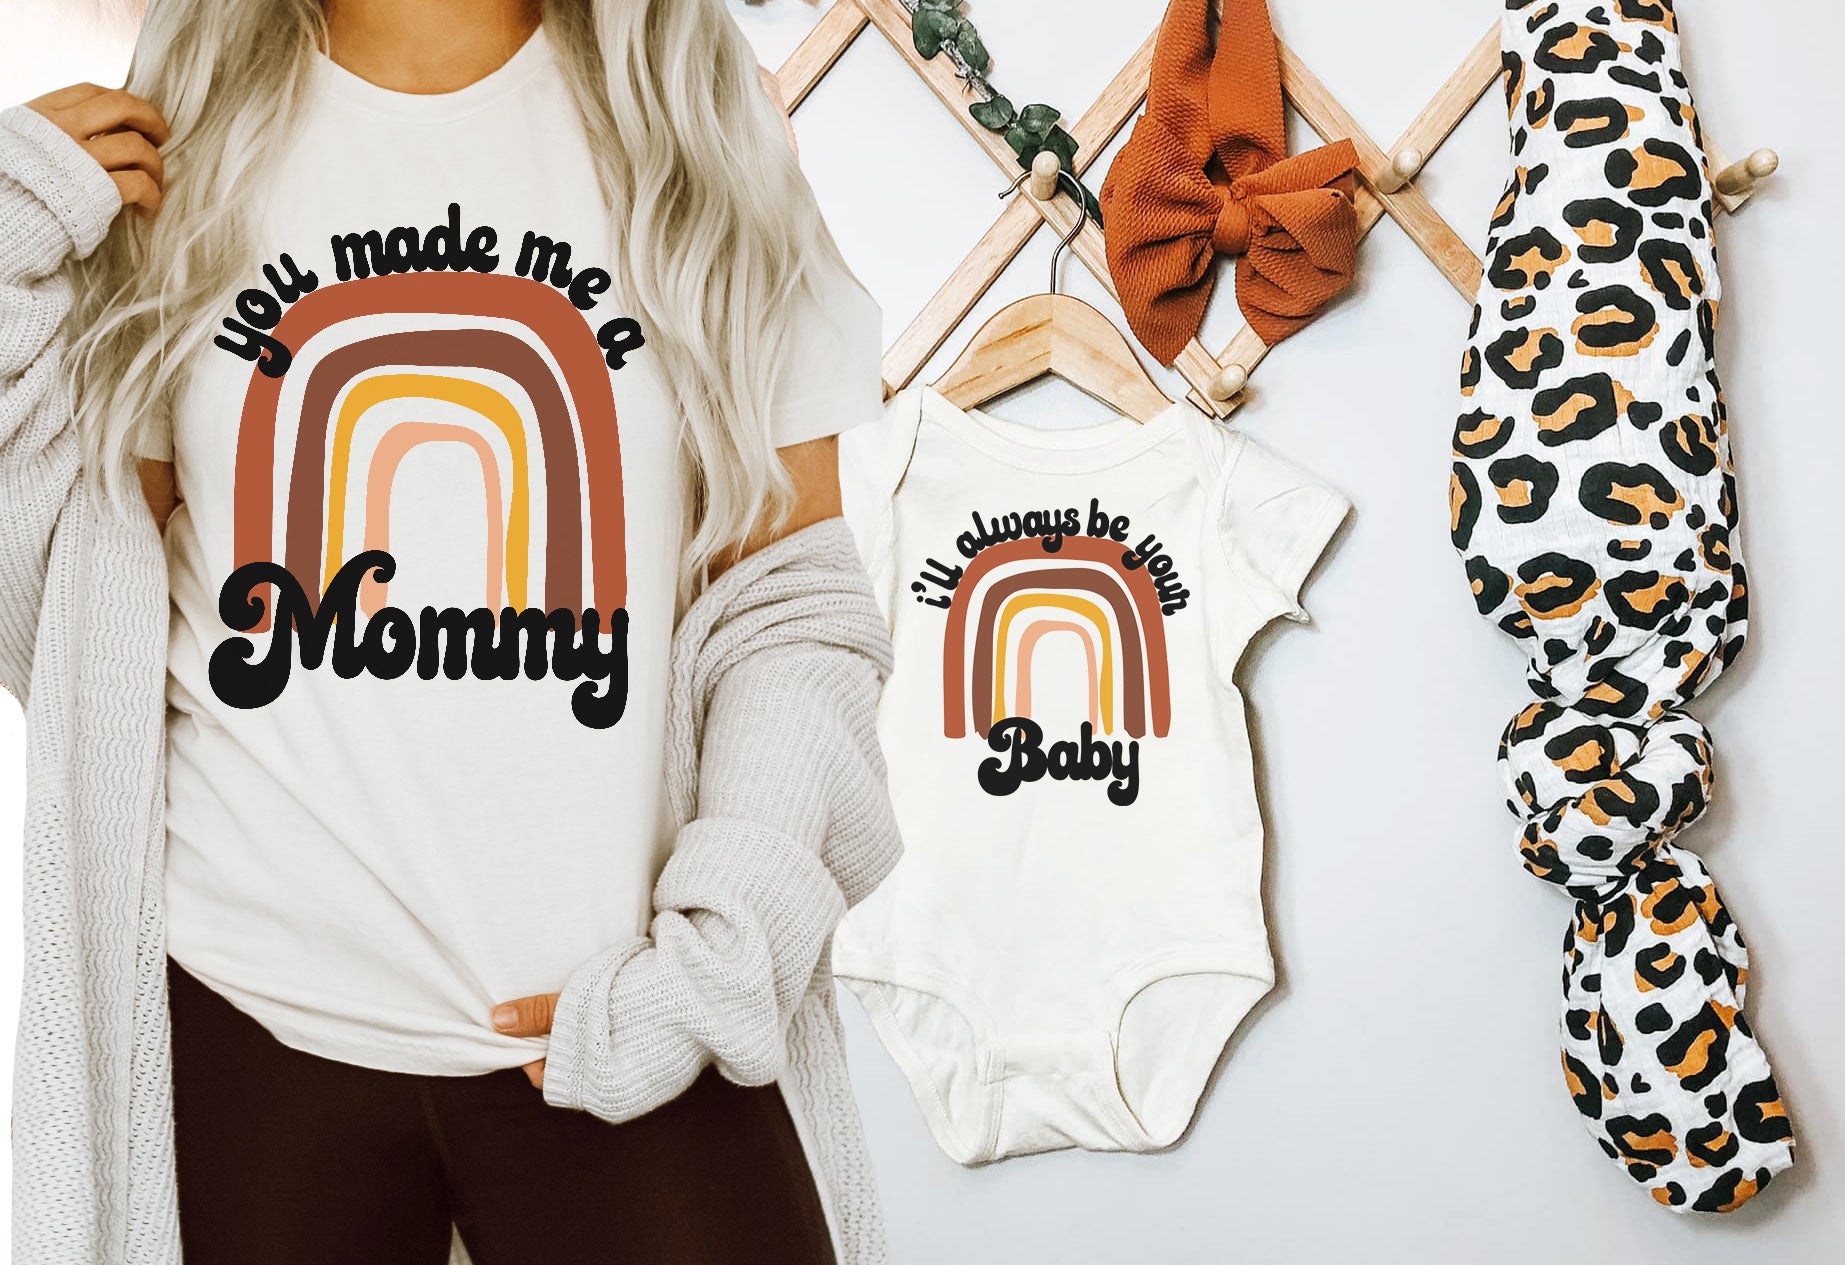 « I'LL ALWAYS BE YOUR BABY » CUSTOMIZED BODYSUIT